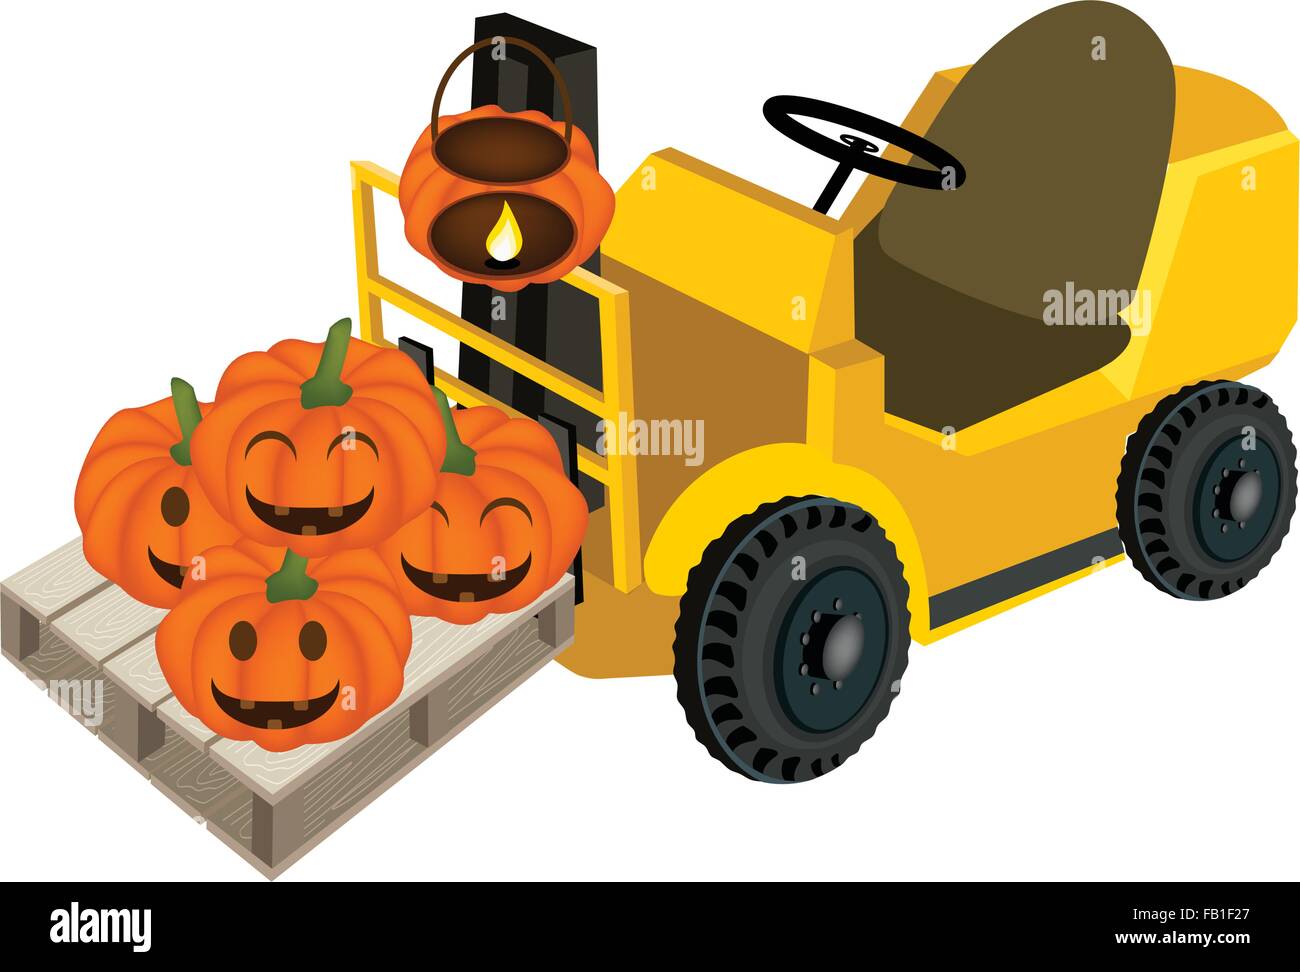 Powered Industrial Forklift, Fork Heavy Machine, Fork Truck or Lift Truck Loading Stack of Happy Jack-o-Lantern Pumpkins in Shop Stock Vector